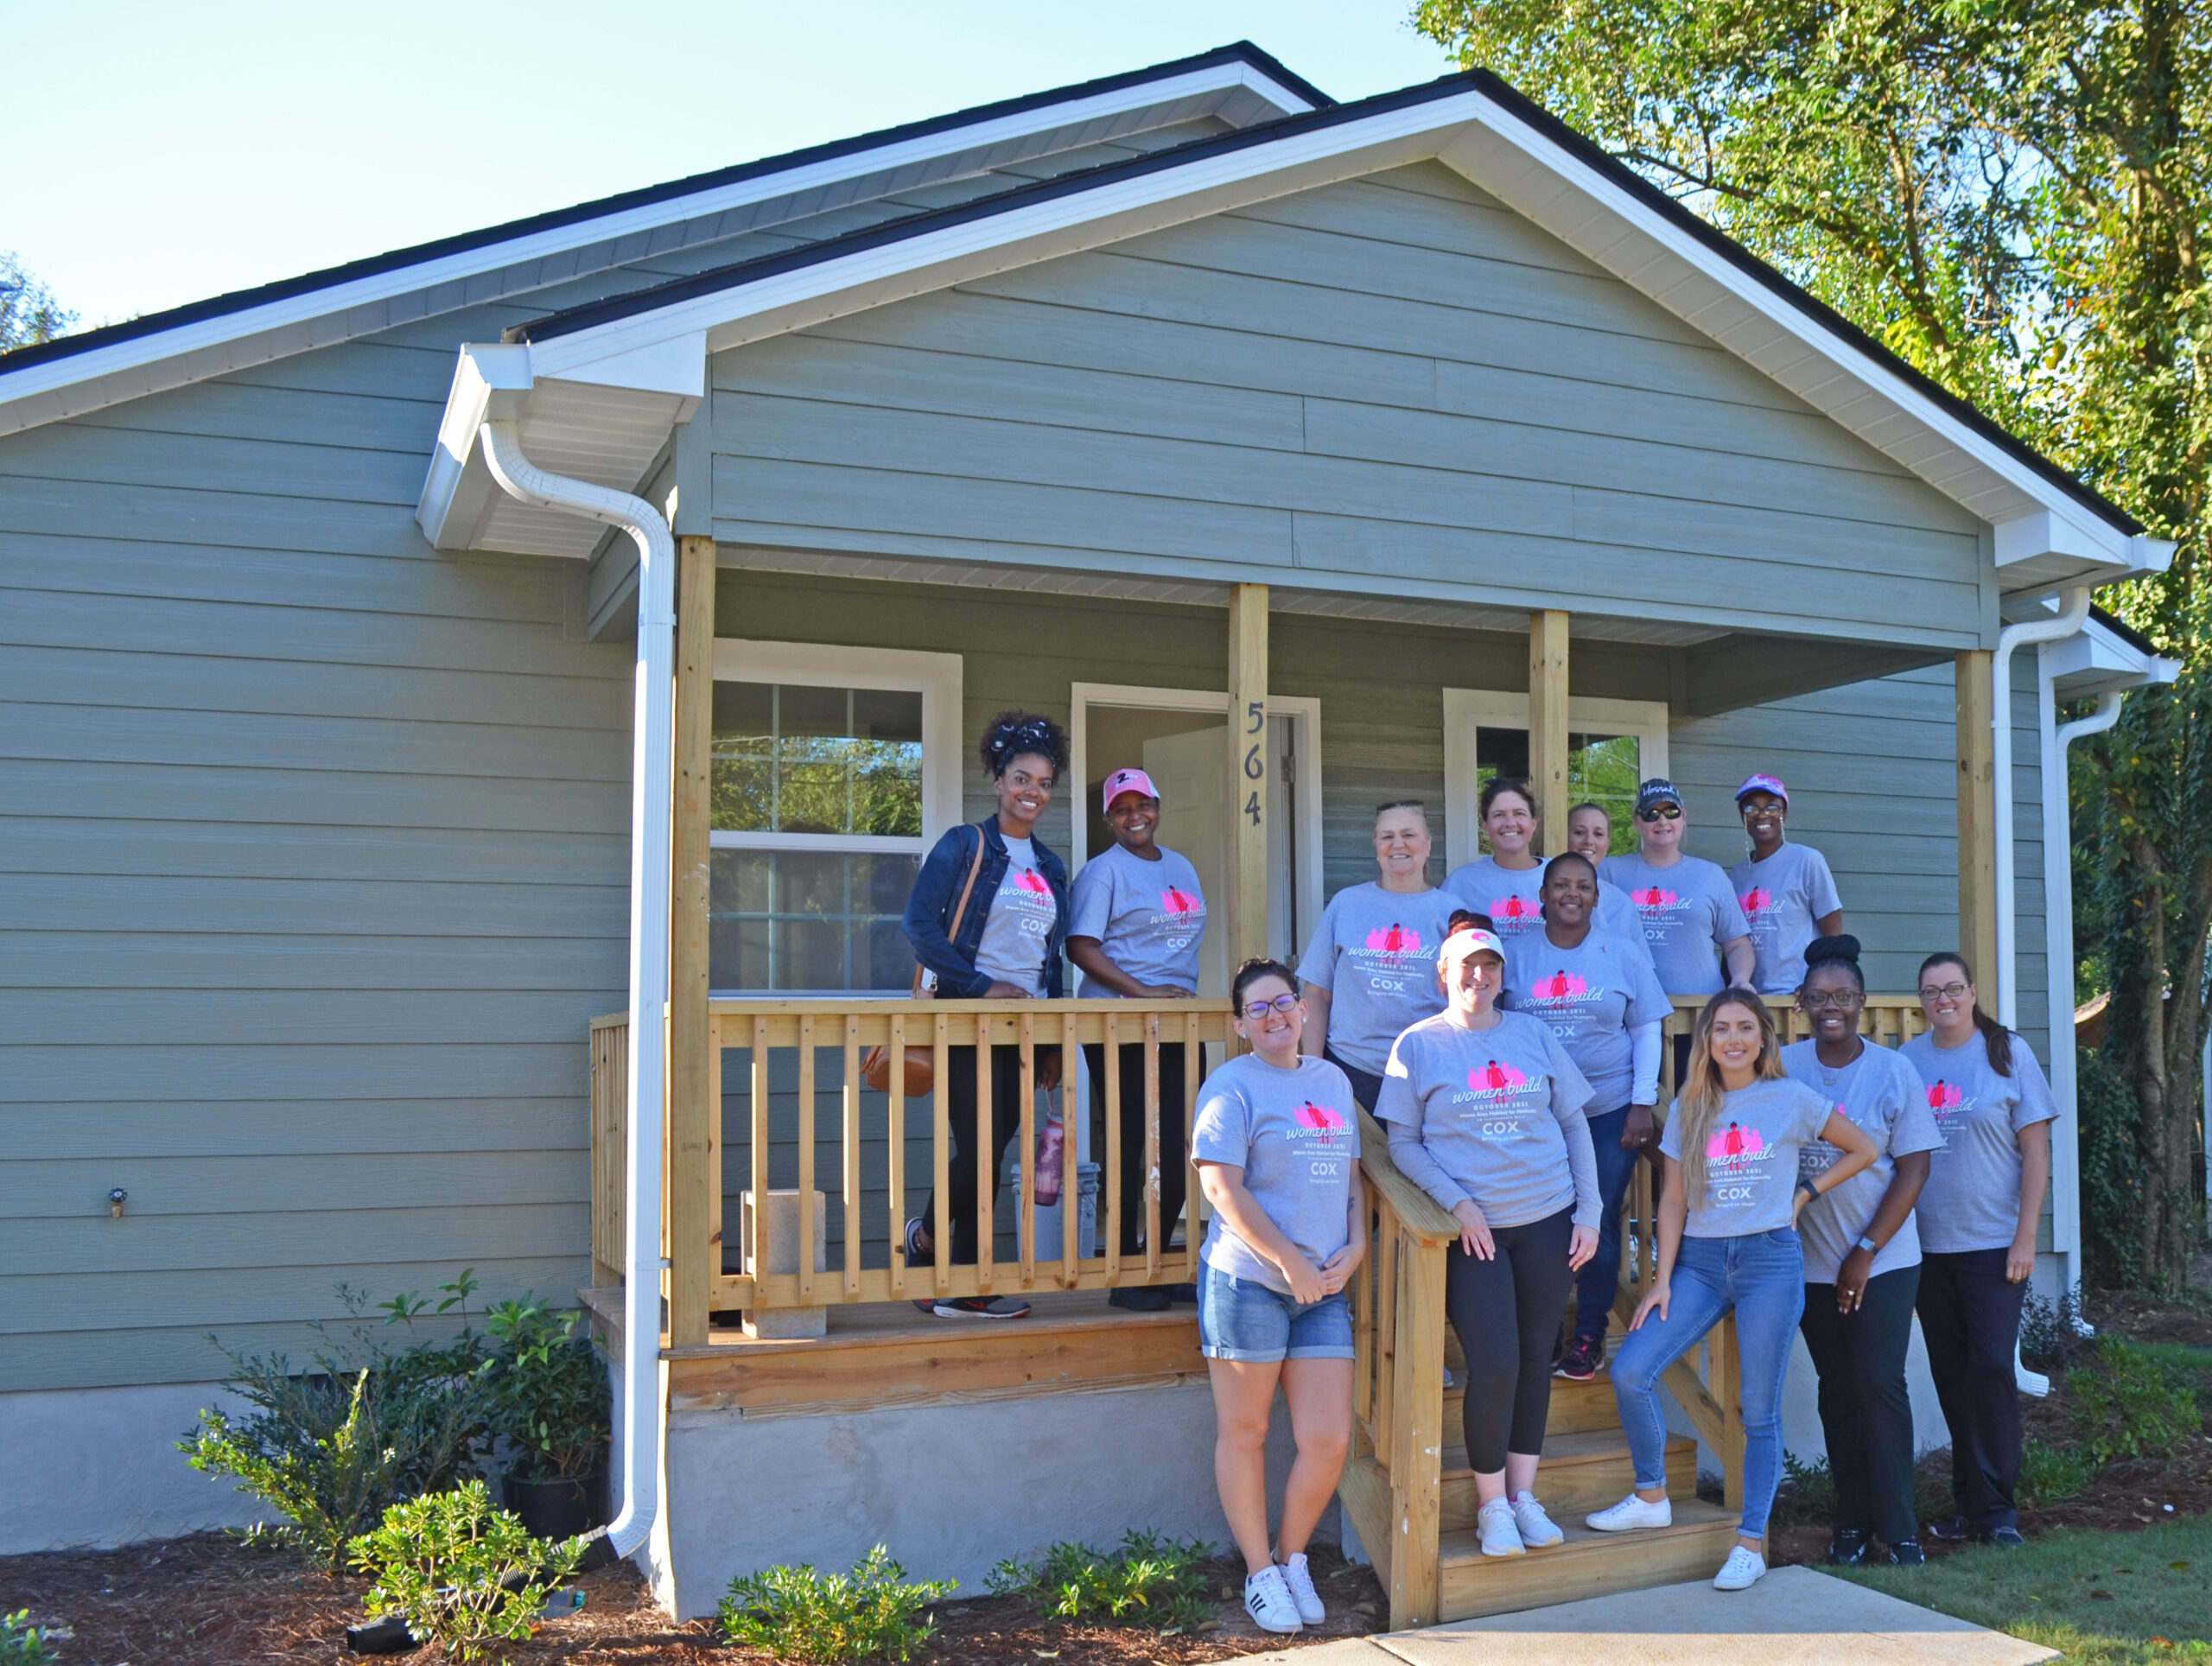 Robins Financial Credit Union Continues Support of Habitat for Humanity